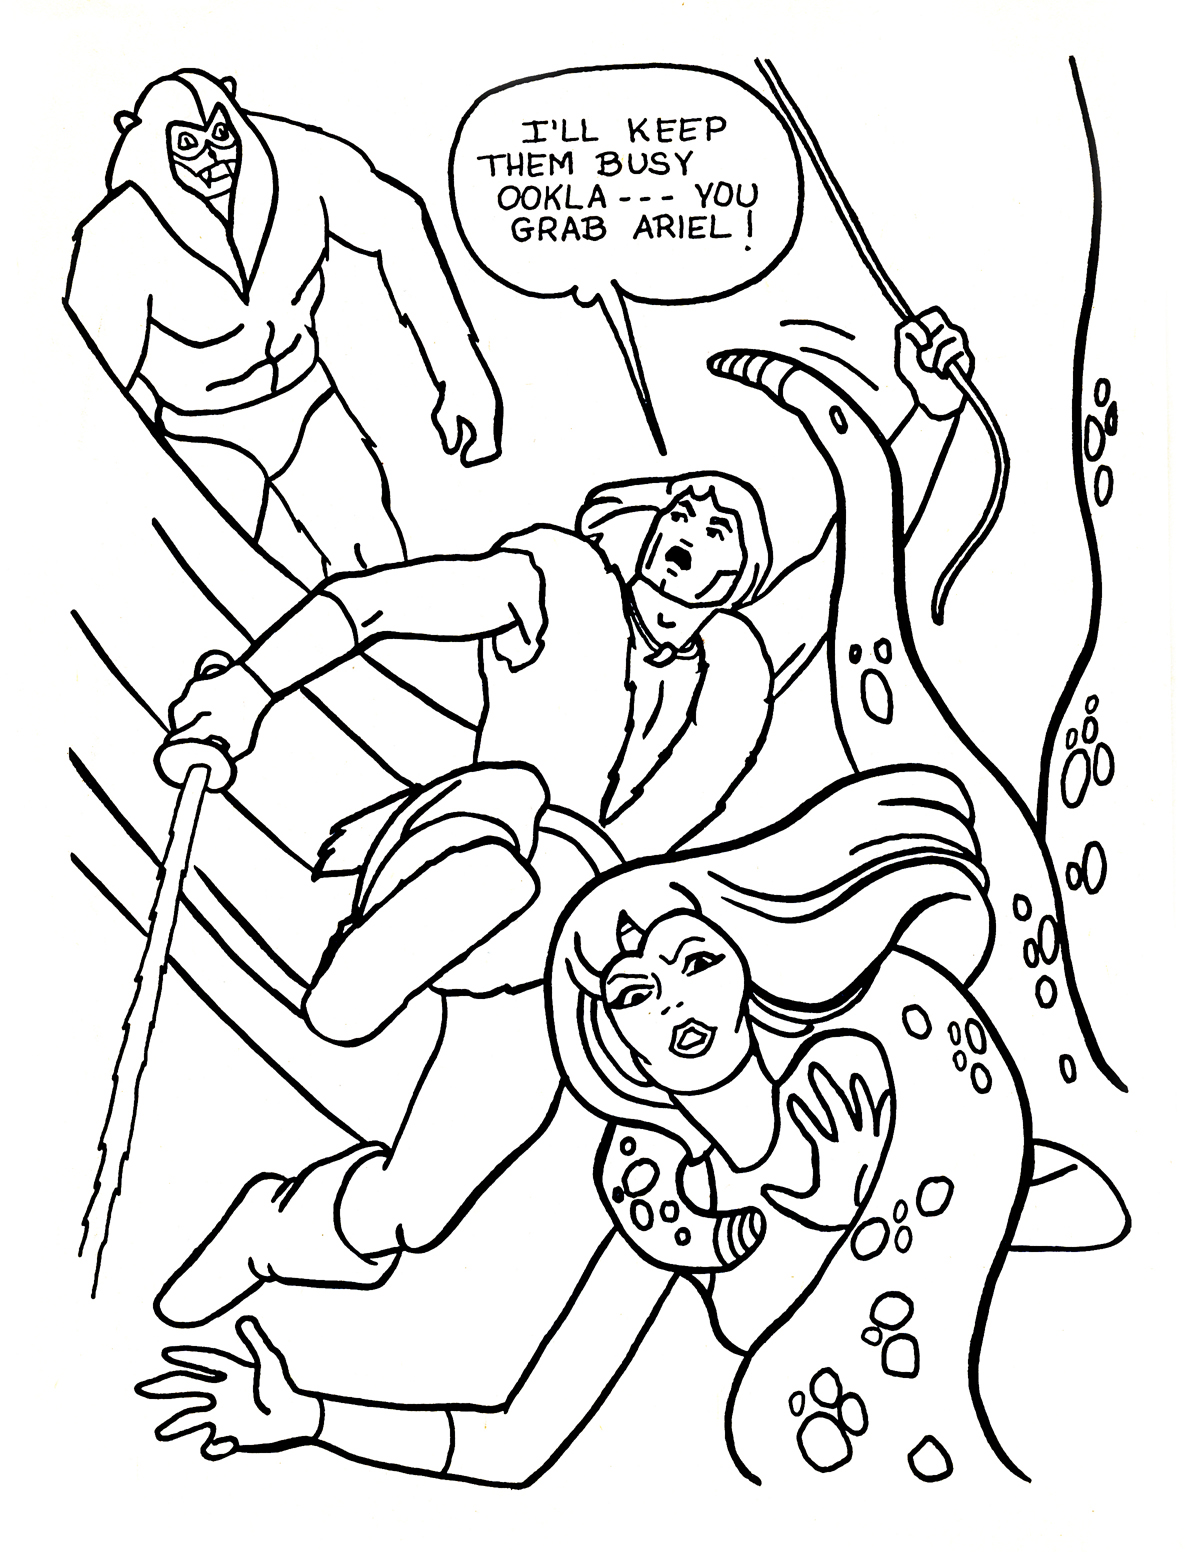 Neato coolville thundarr the barbarian in the floating palace printable coloring book